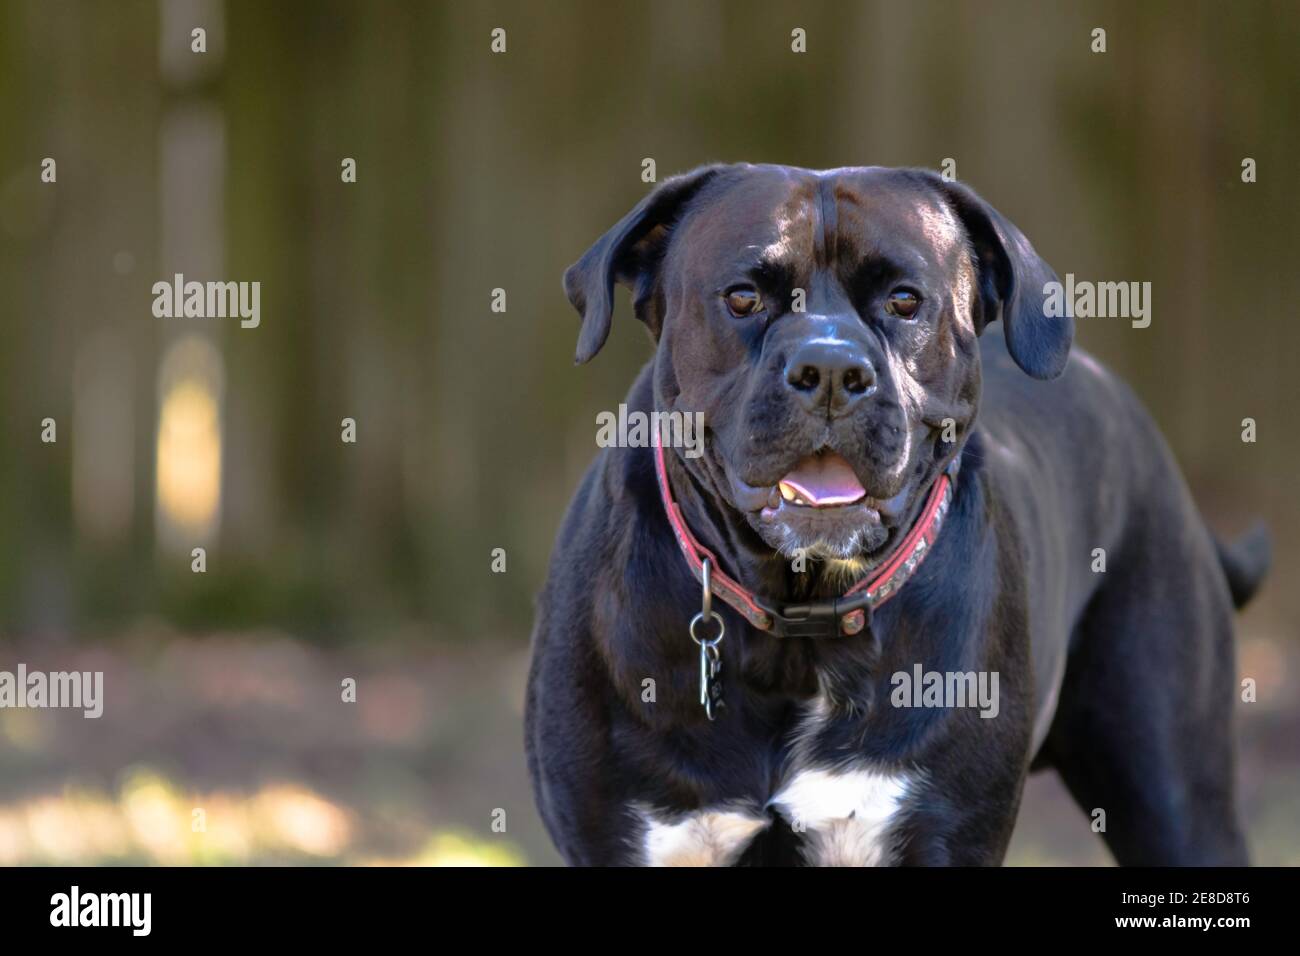 A black and white Lab-Pitt cross looking at the camera with blurred background Stock Photo